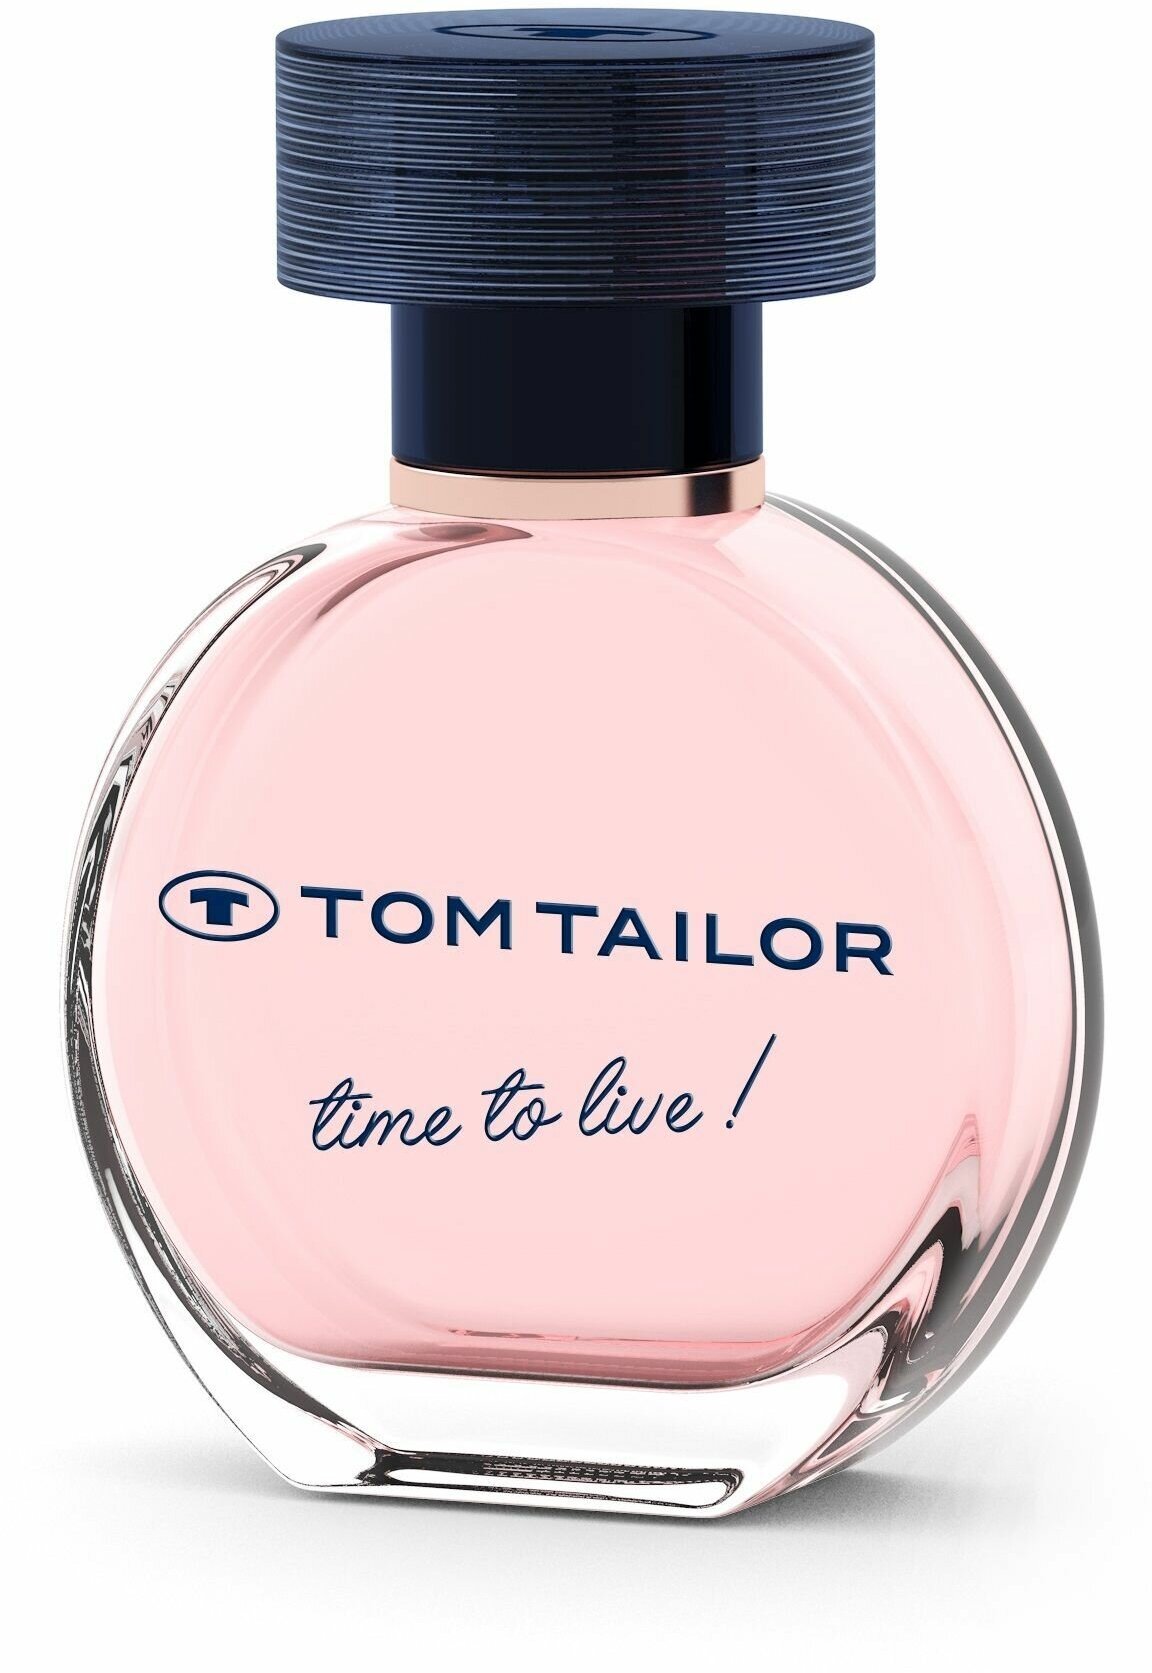 Tom Tailor Time To Live Парфюмерная вода 30 мл